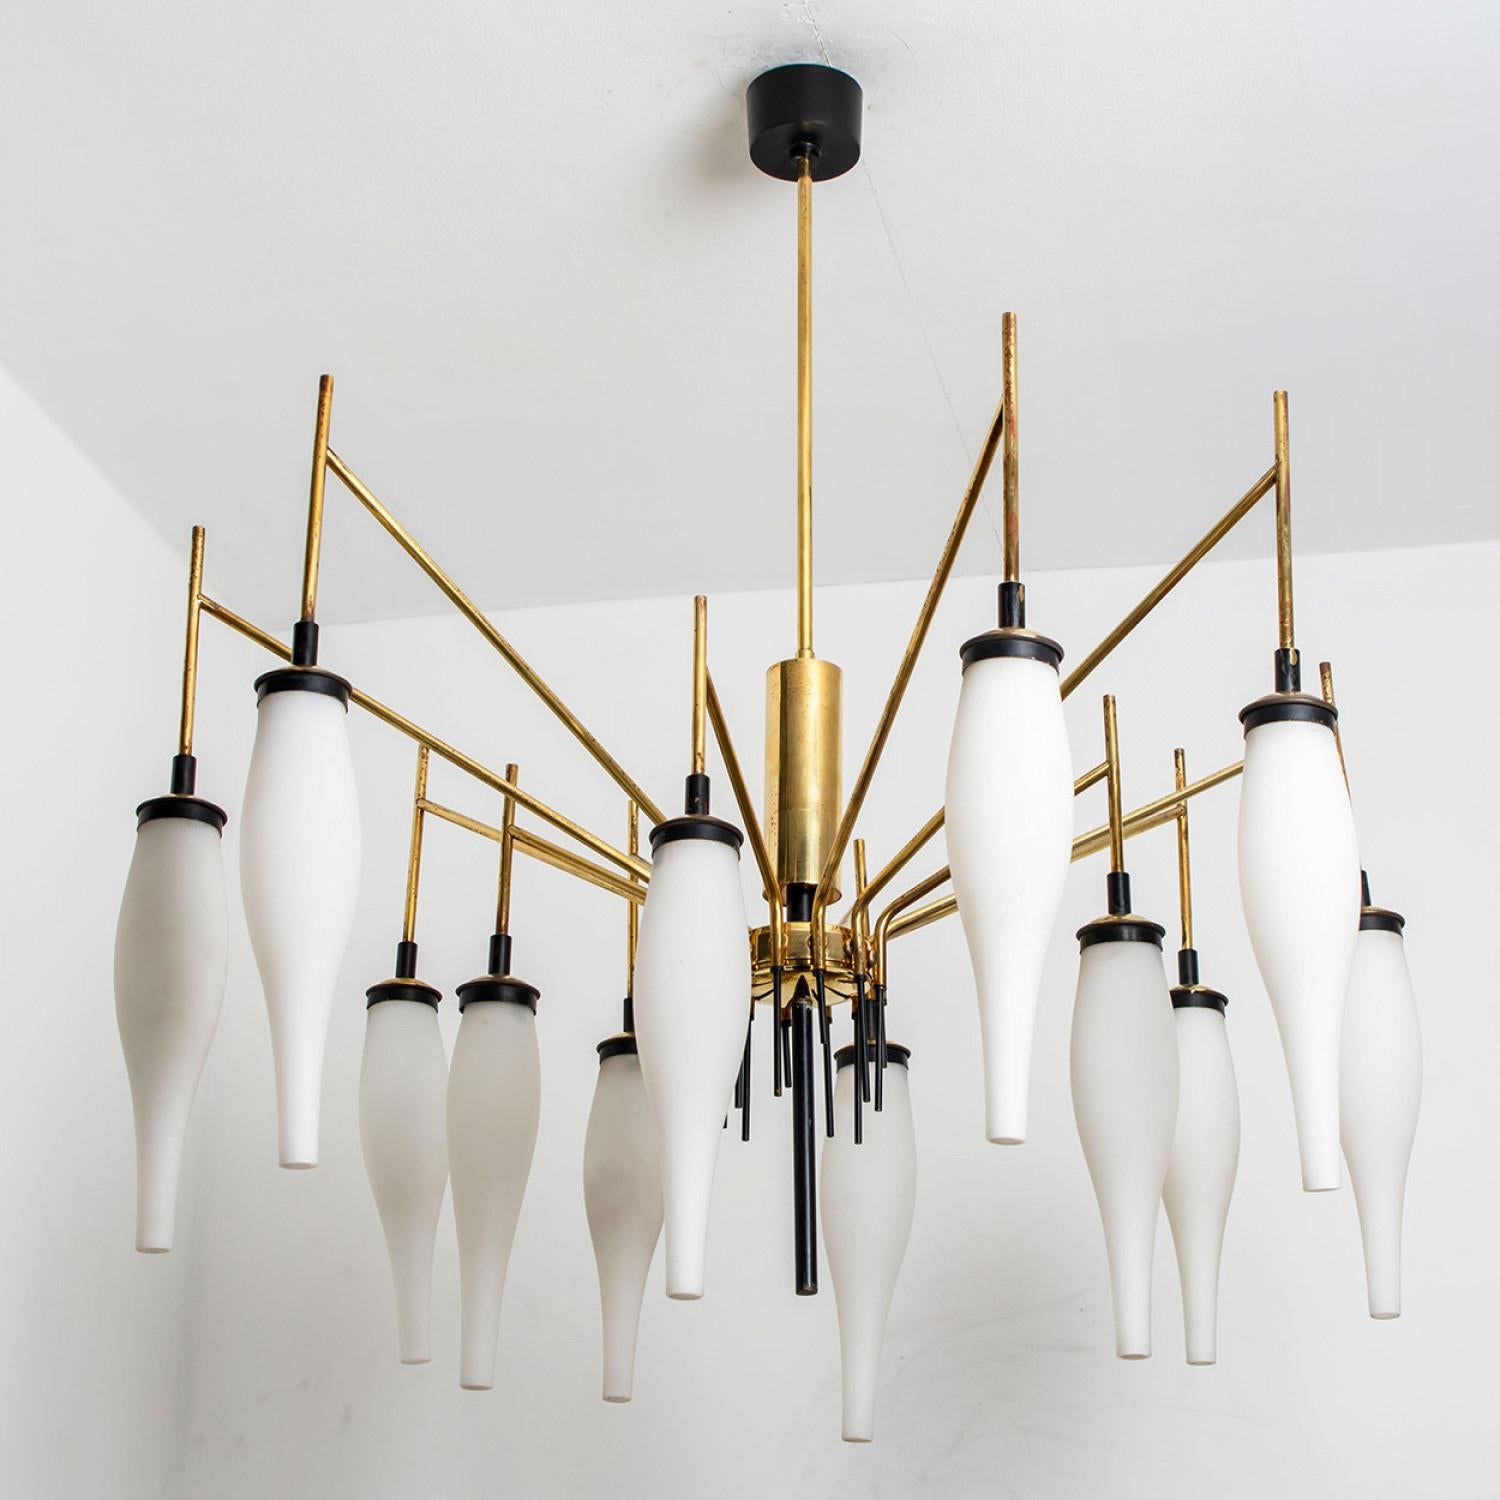 Playful brass and milkglass chandelier designed by Stilnovo. Manufactured in Italy, around 1960. This magnificent chandelier has a beautiful shape and is richly decorated with crystal drops. The chandelier is made of a brass frame with 12 arms